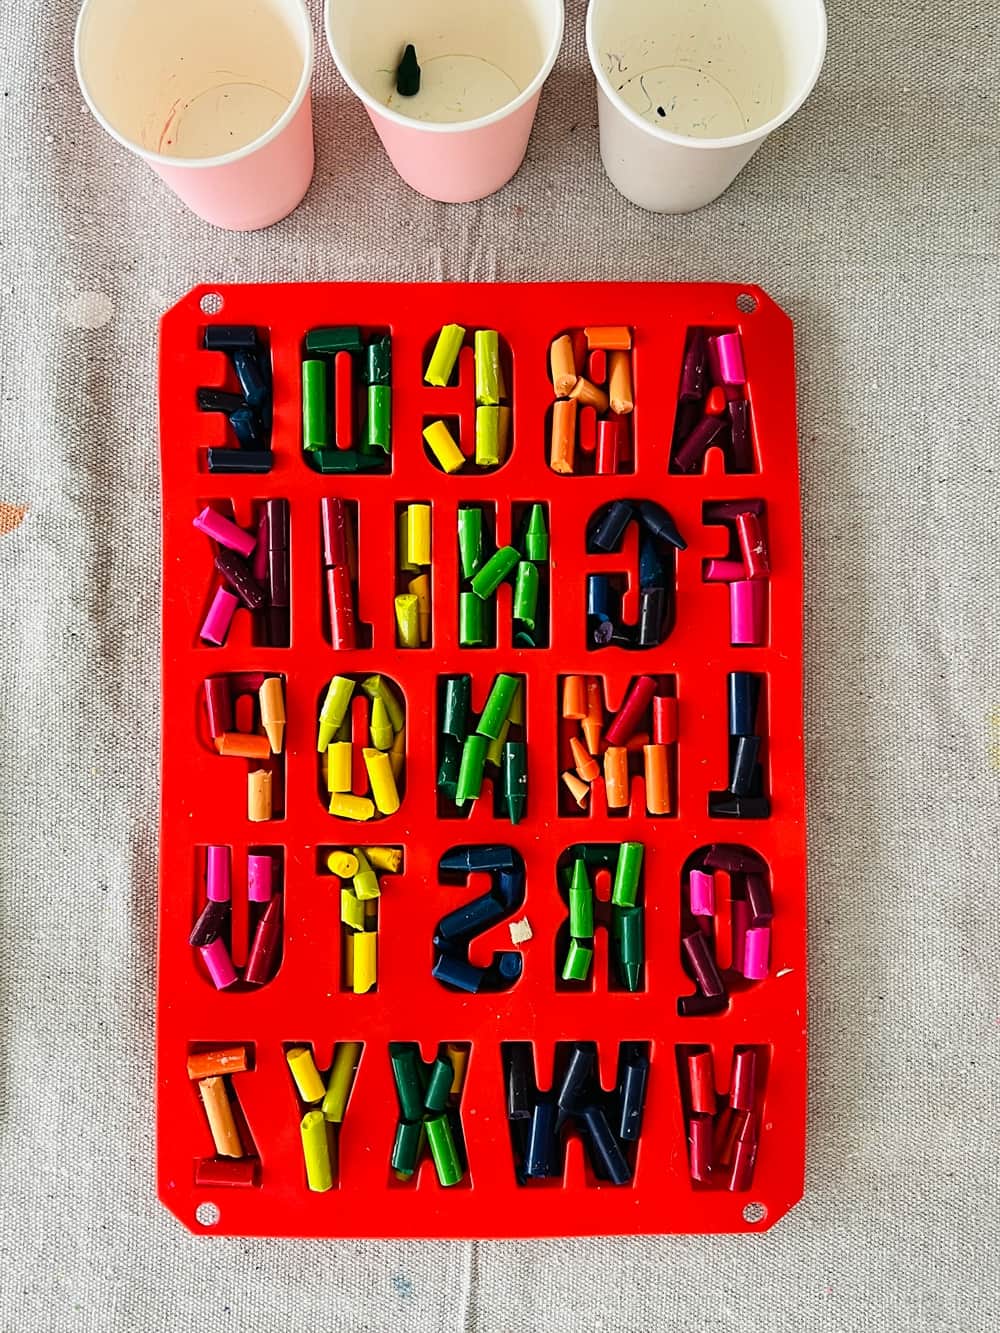 Melted crayon letters